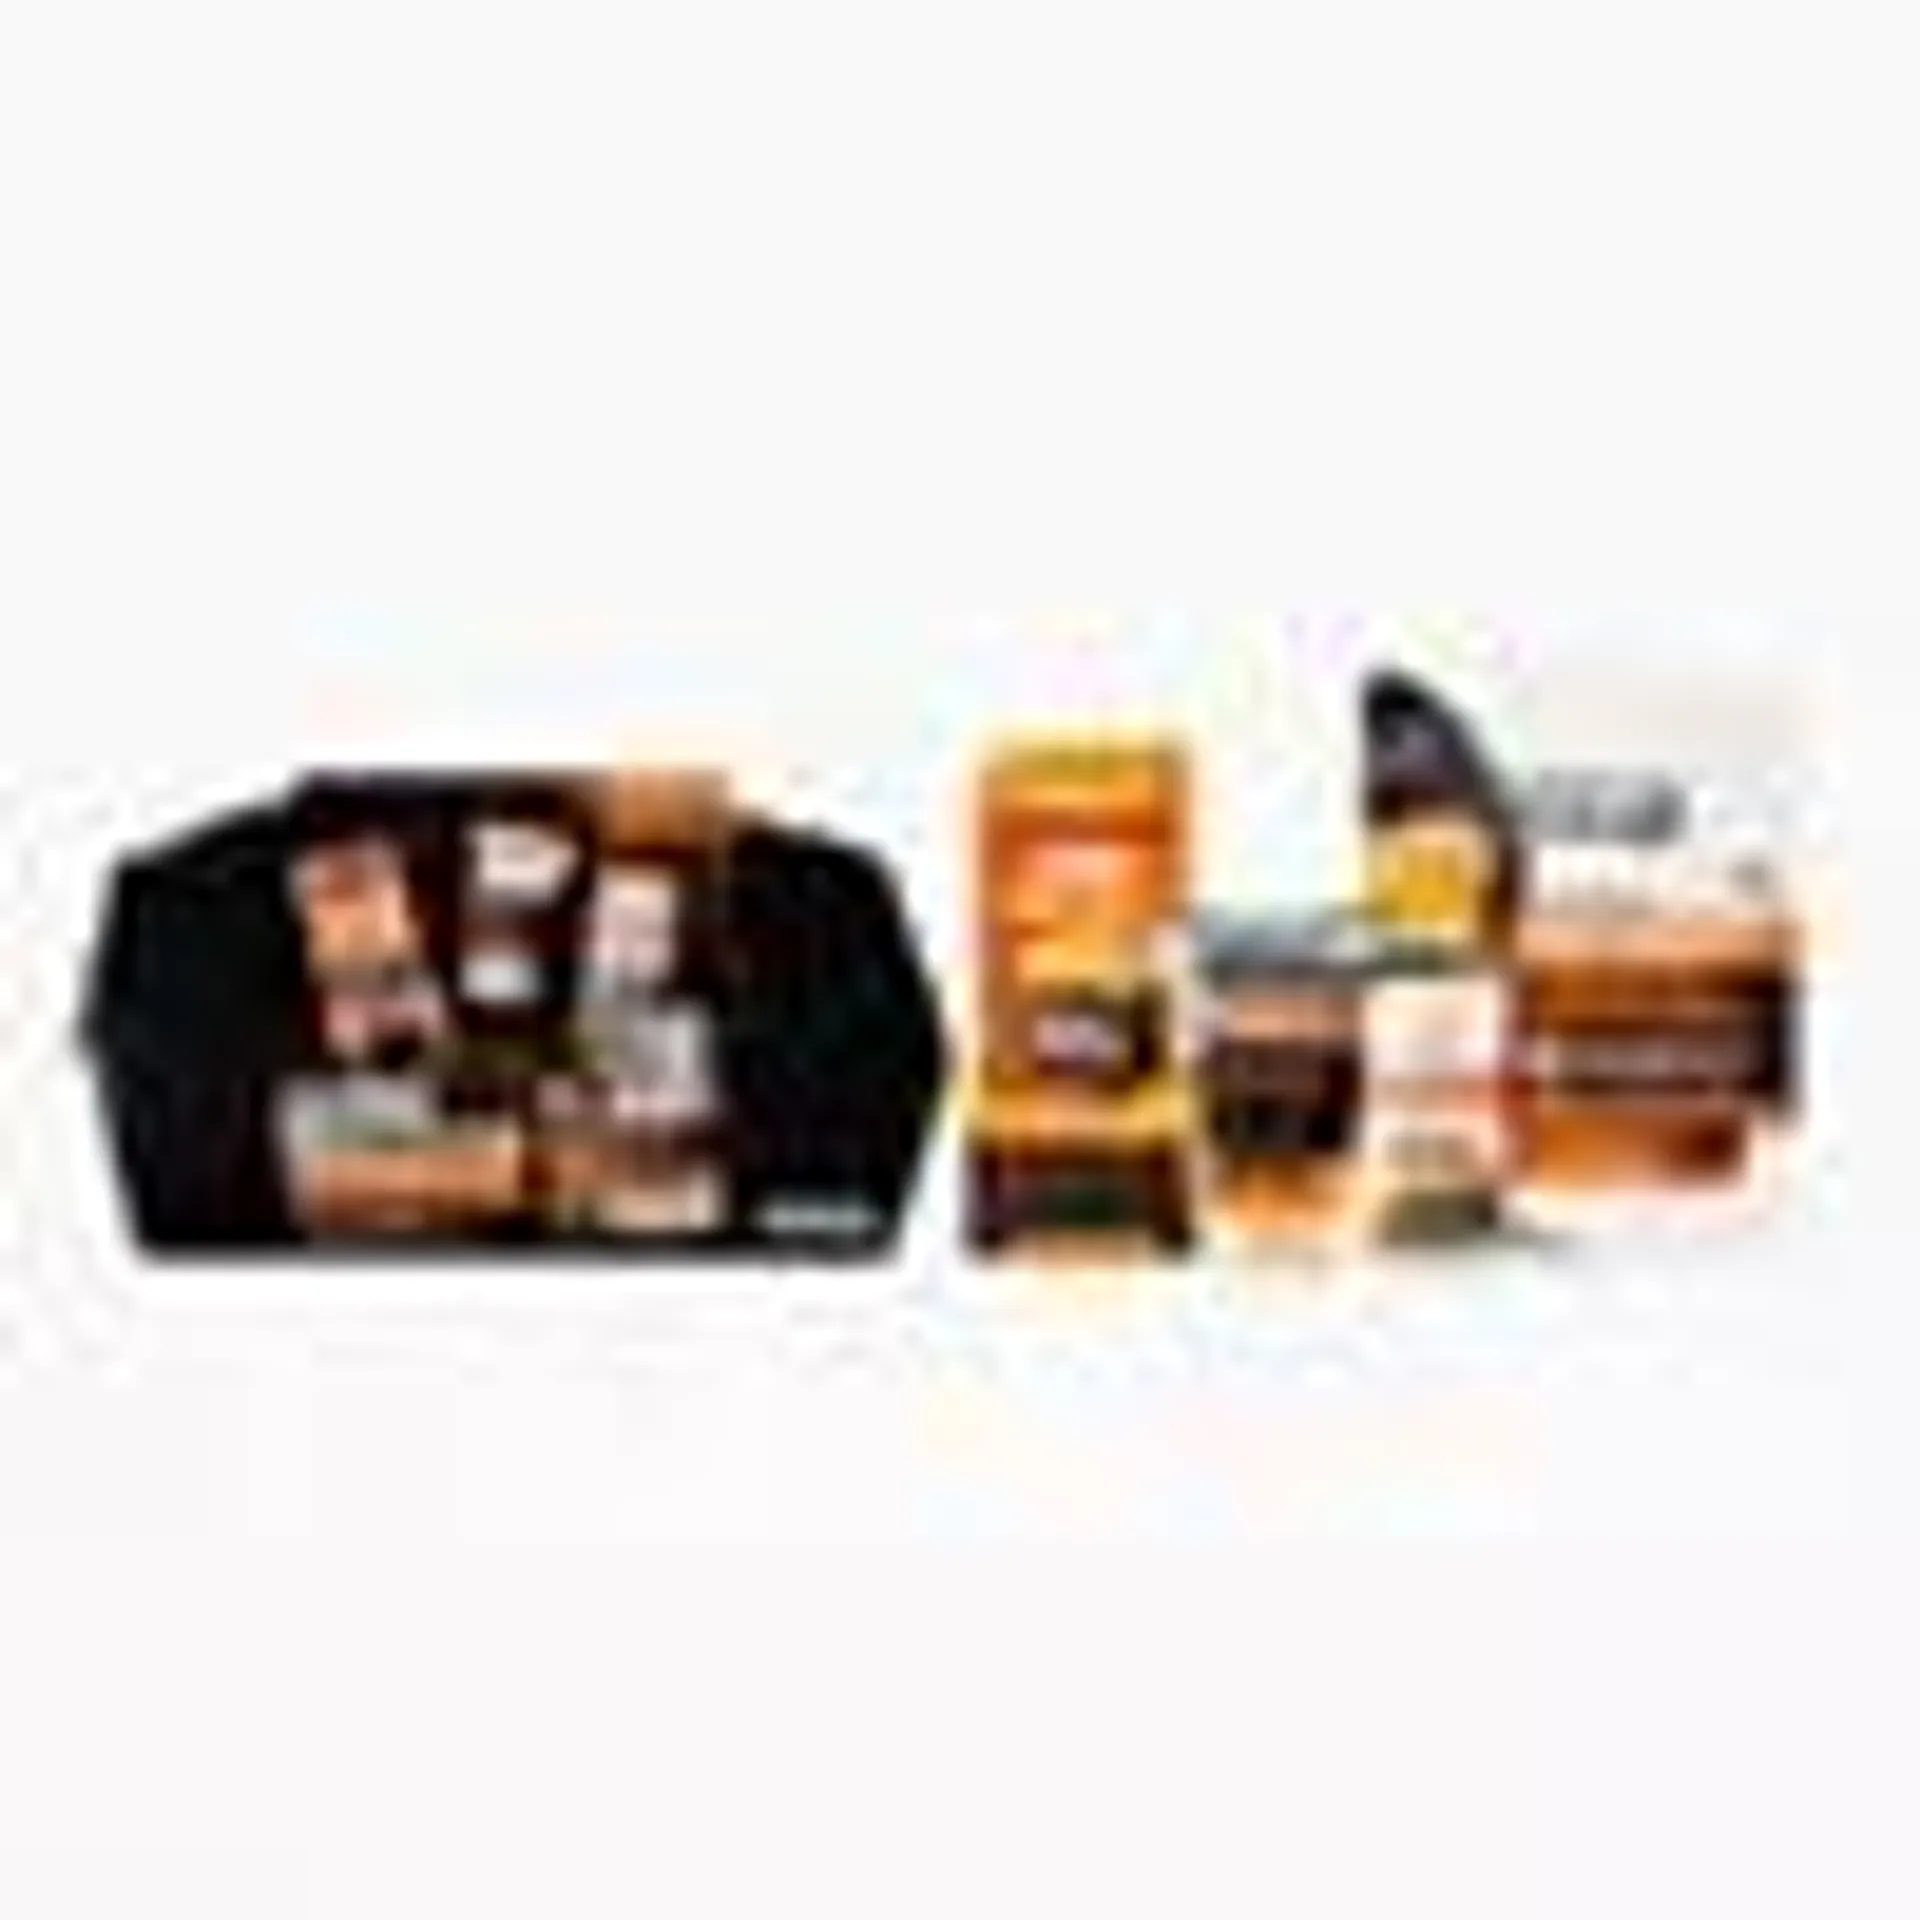 L'Oreal Men Expert Fully Charged Wash Bag 4 Piece Gift Set